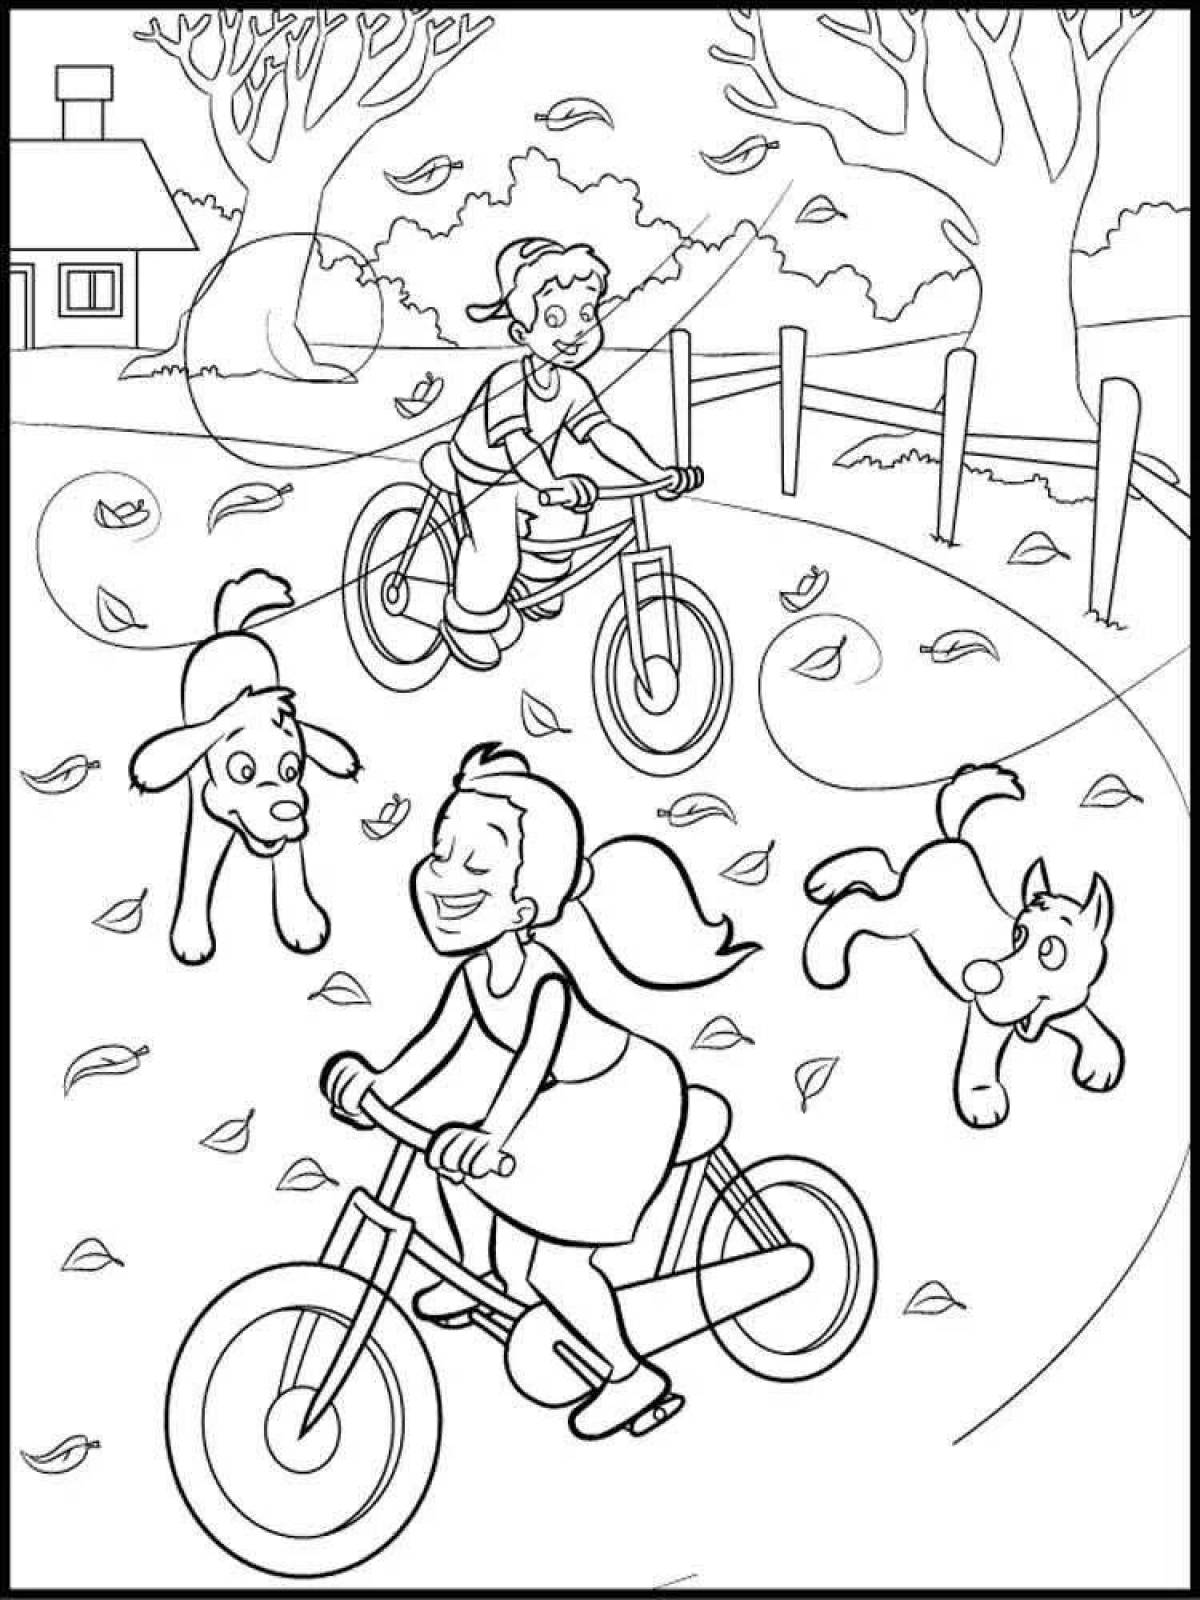 Coloring book shining park for kids